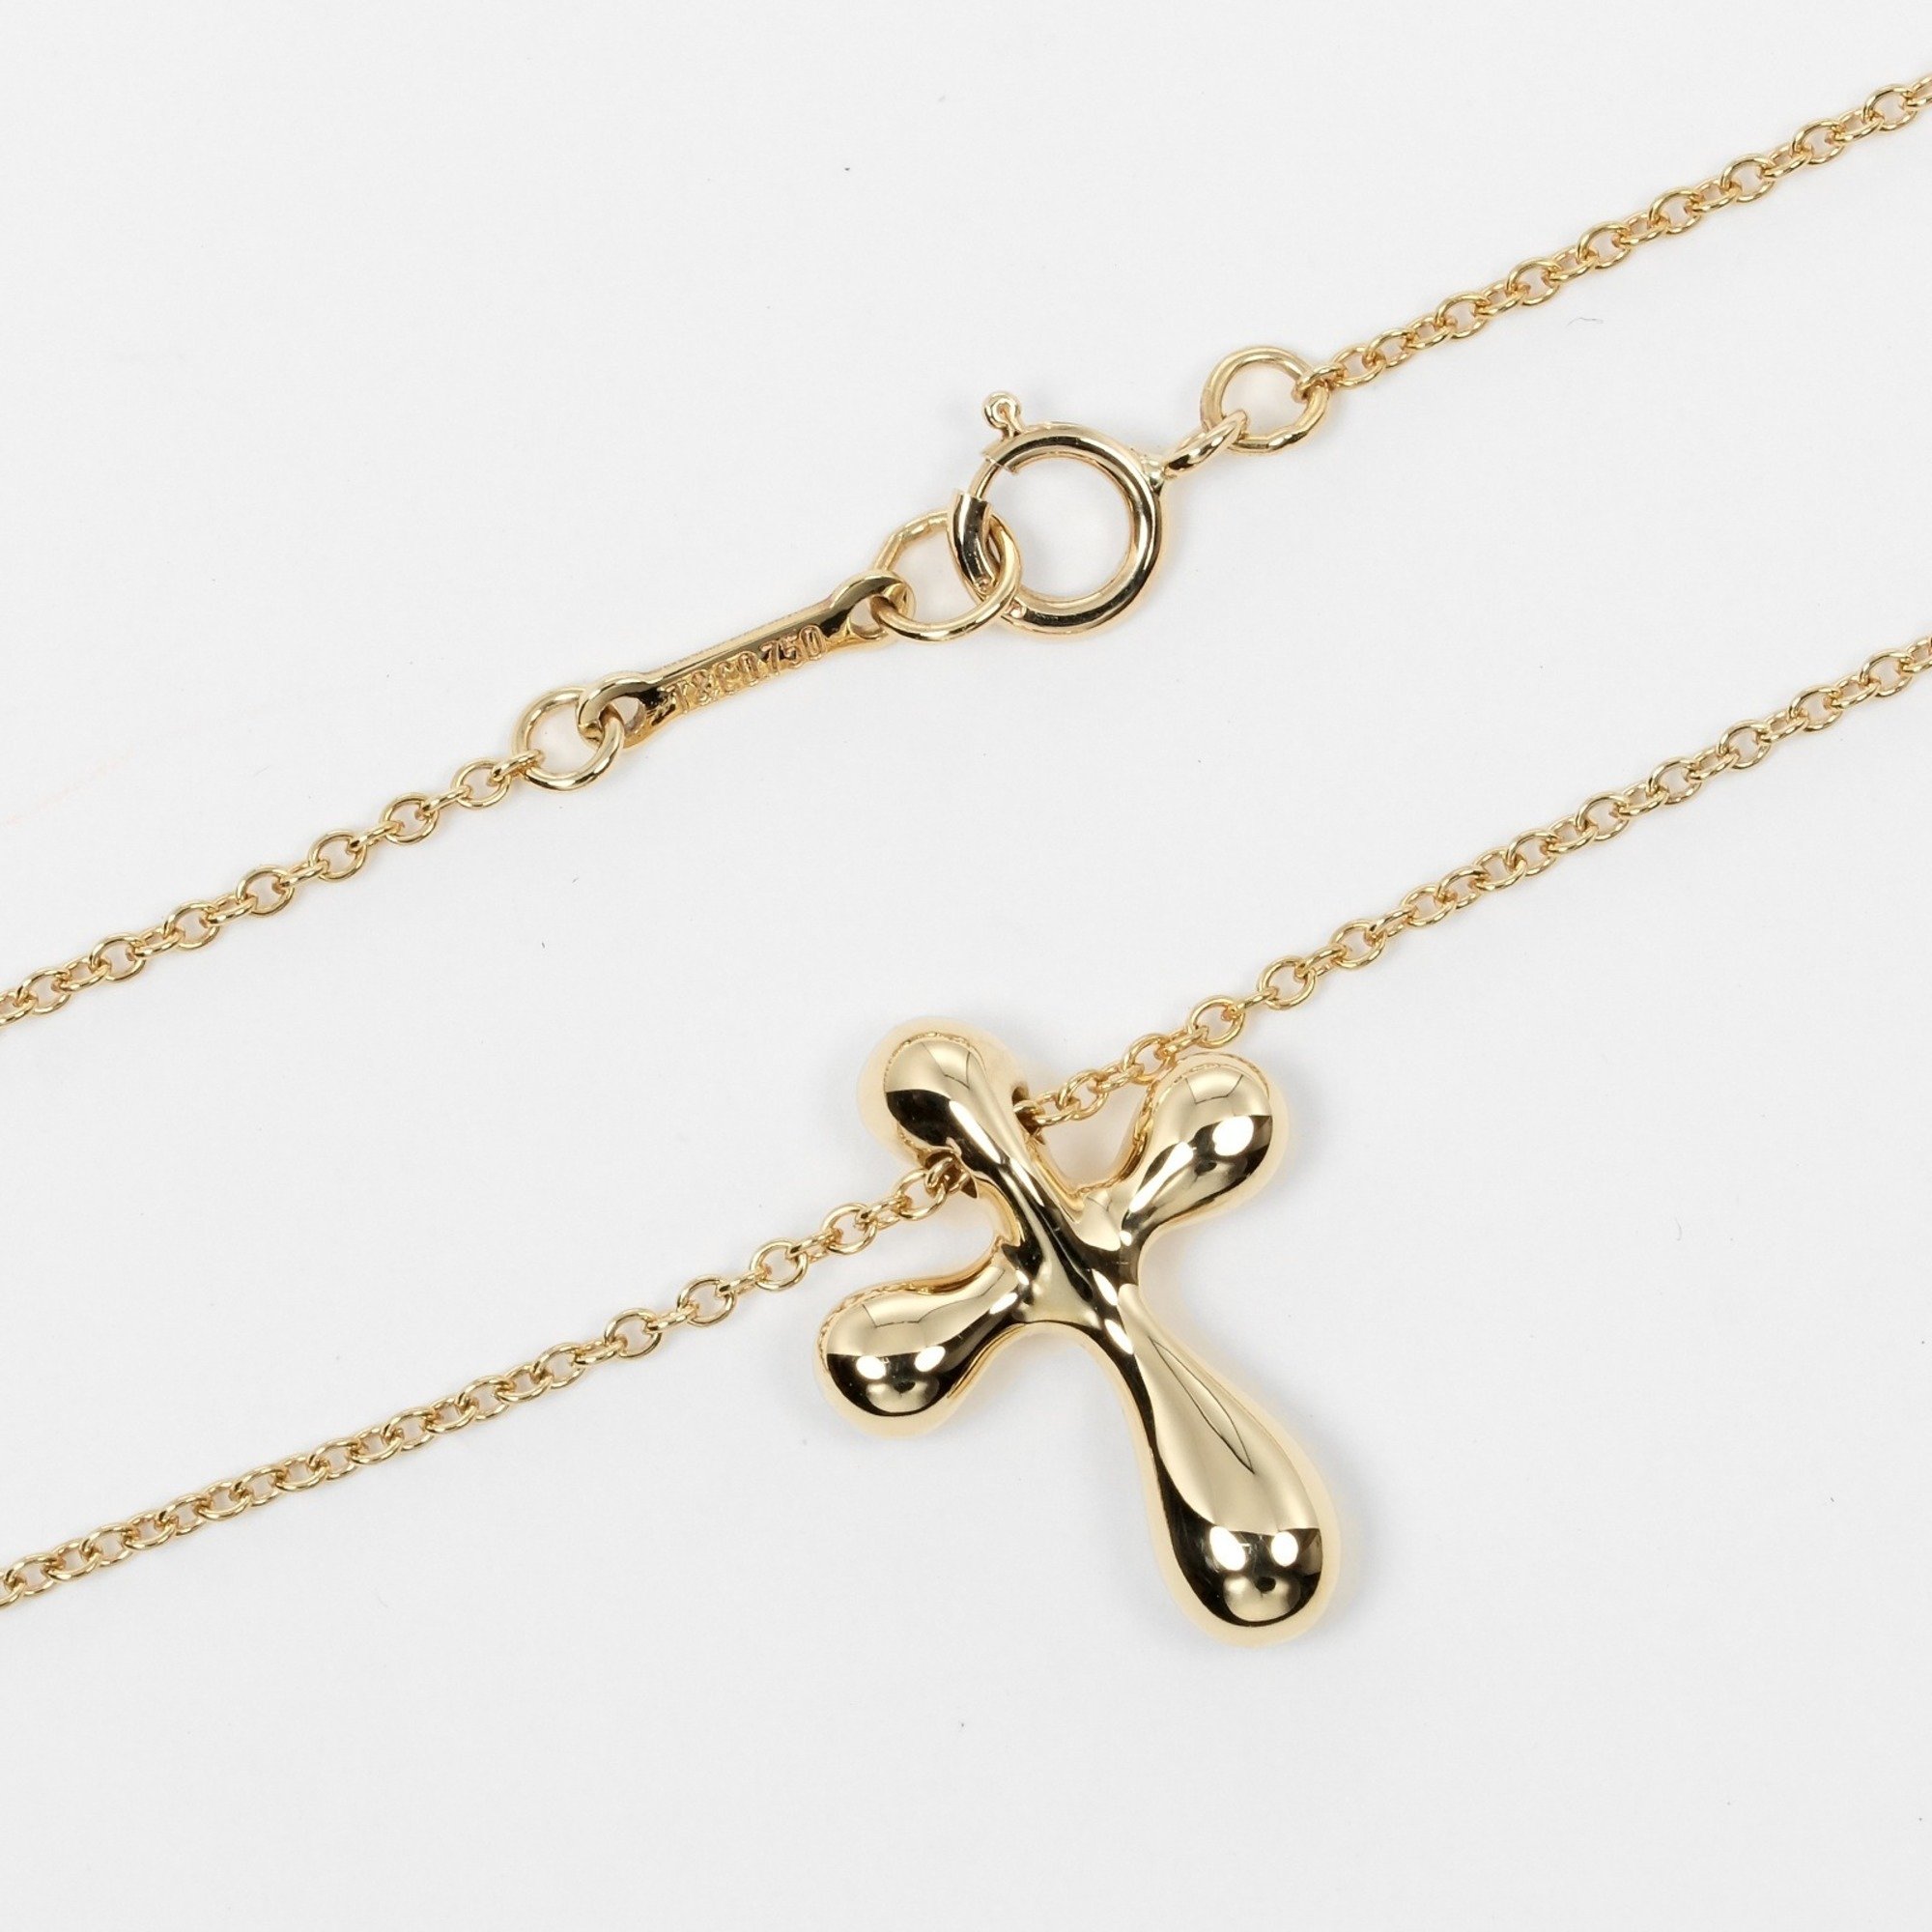 Tiffany & Co. Small Cross Necklace, 18K Yellow Gold, approx. 3.71g, I132124041